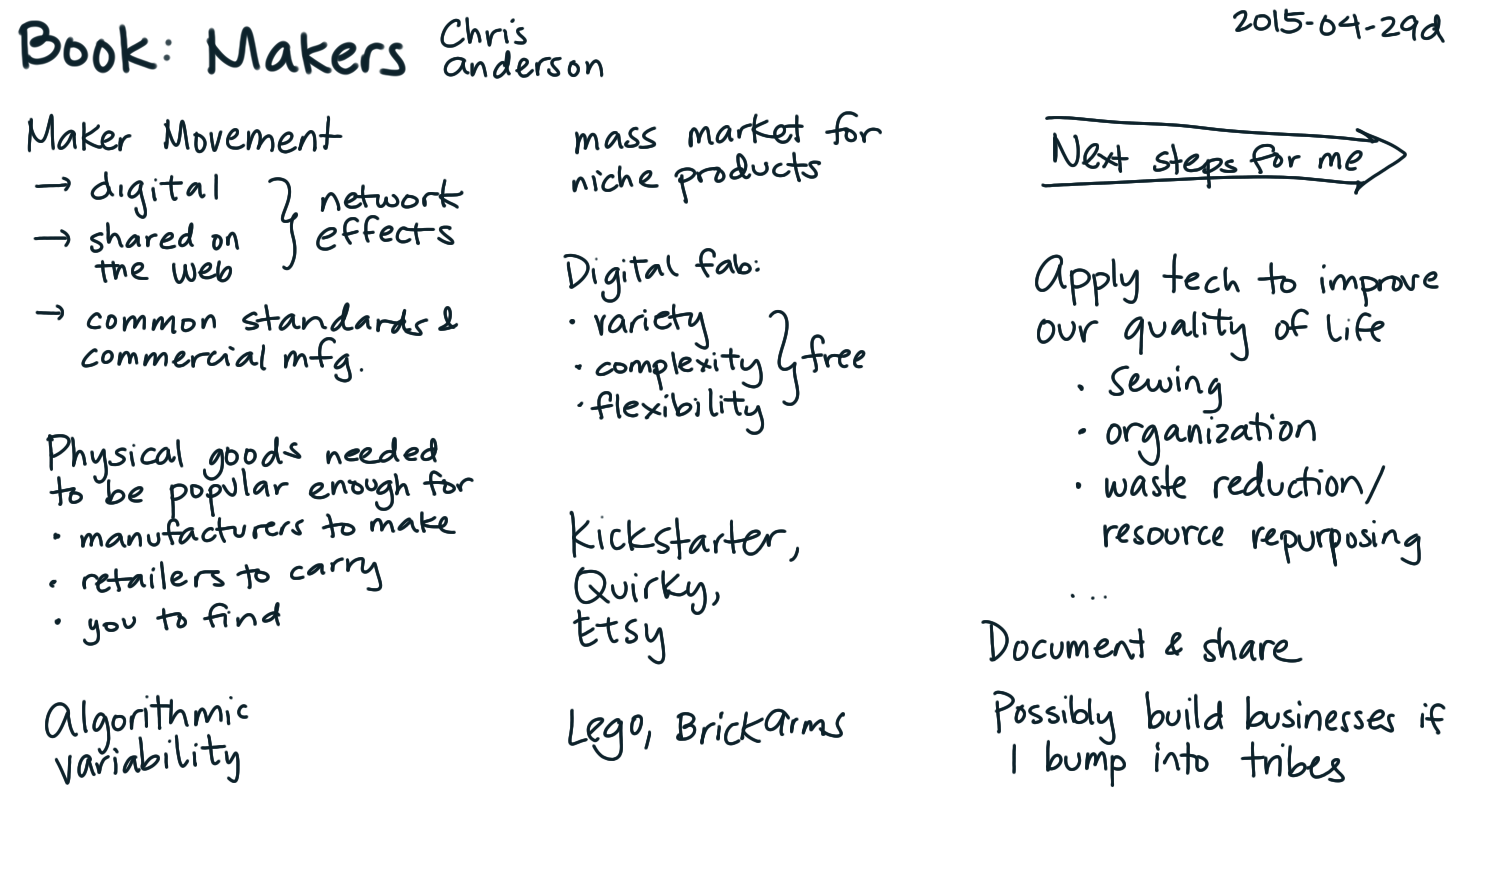 2015-04-29d Raw book notes - Makers - Chris Anderson -- index card #book.png